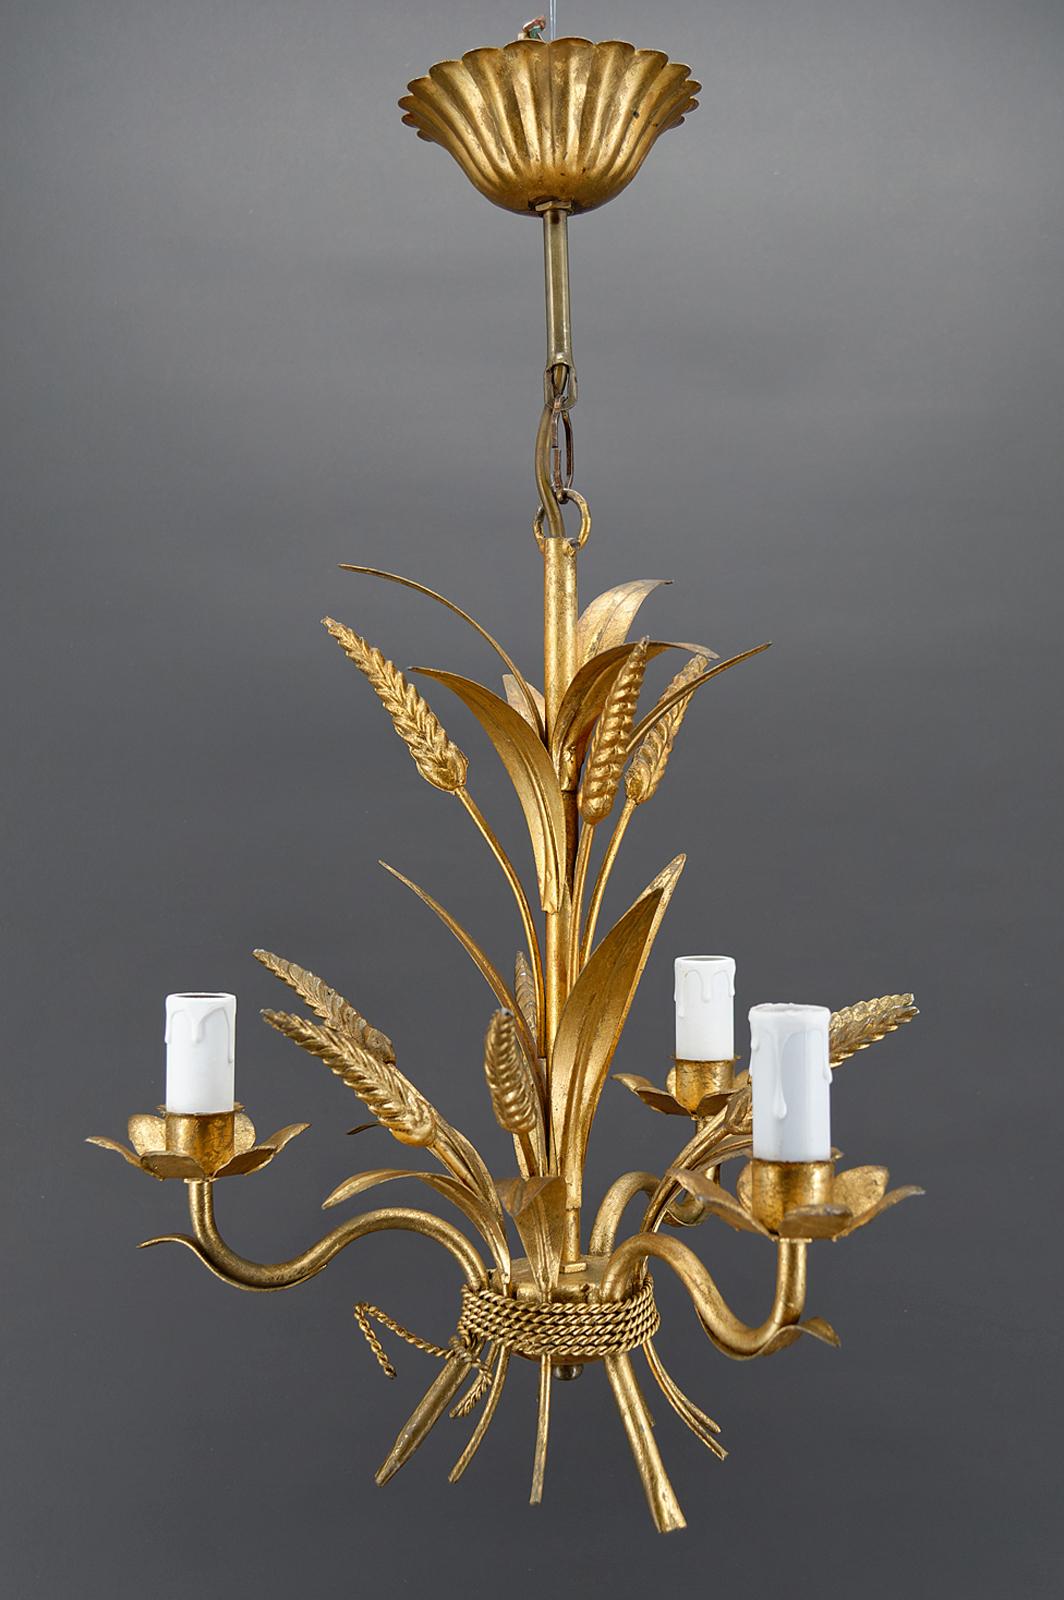 Elegant chandelier / pendant with 3 lights in gilded metal, figuring a bouquet of ears of wheat.

Hollywood Regency / Mid-century Modern style, circa 1960.
In the style of the productions of Goossens, Maison Jansen. 

In very good